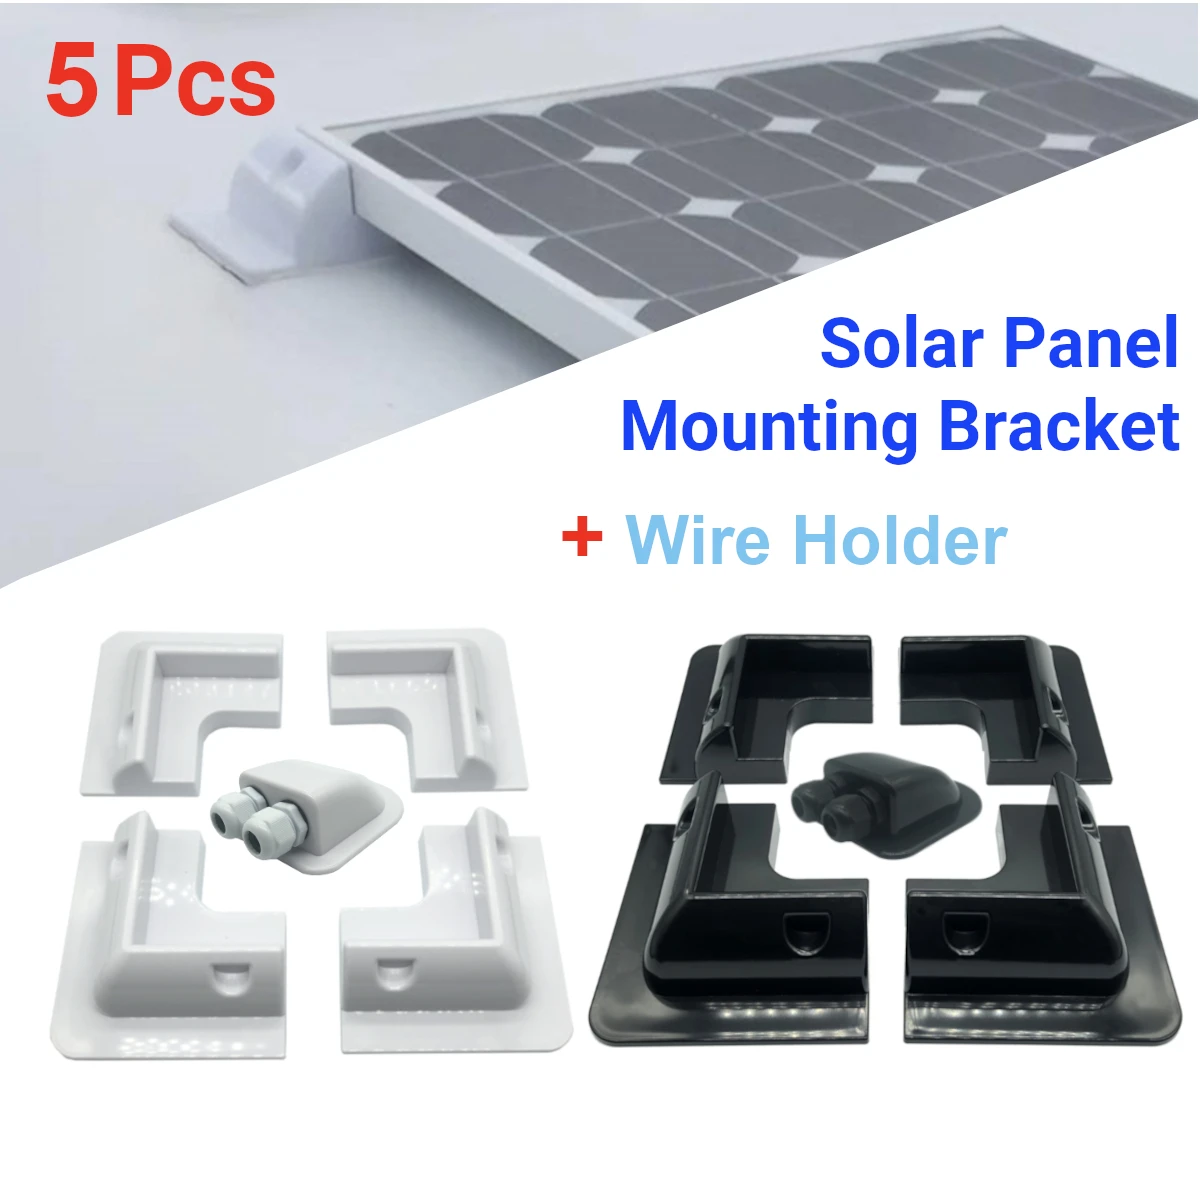 5x RV Top Roof Solar Panel Mounting Fixing Bracket Kit Wire Box ABS Supporting Holder for Caravans Camper Boat Yacht Motorhome